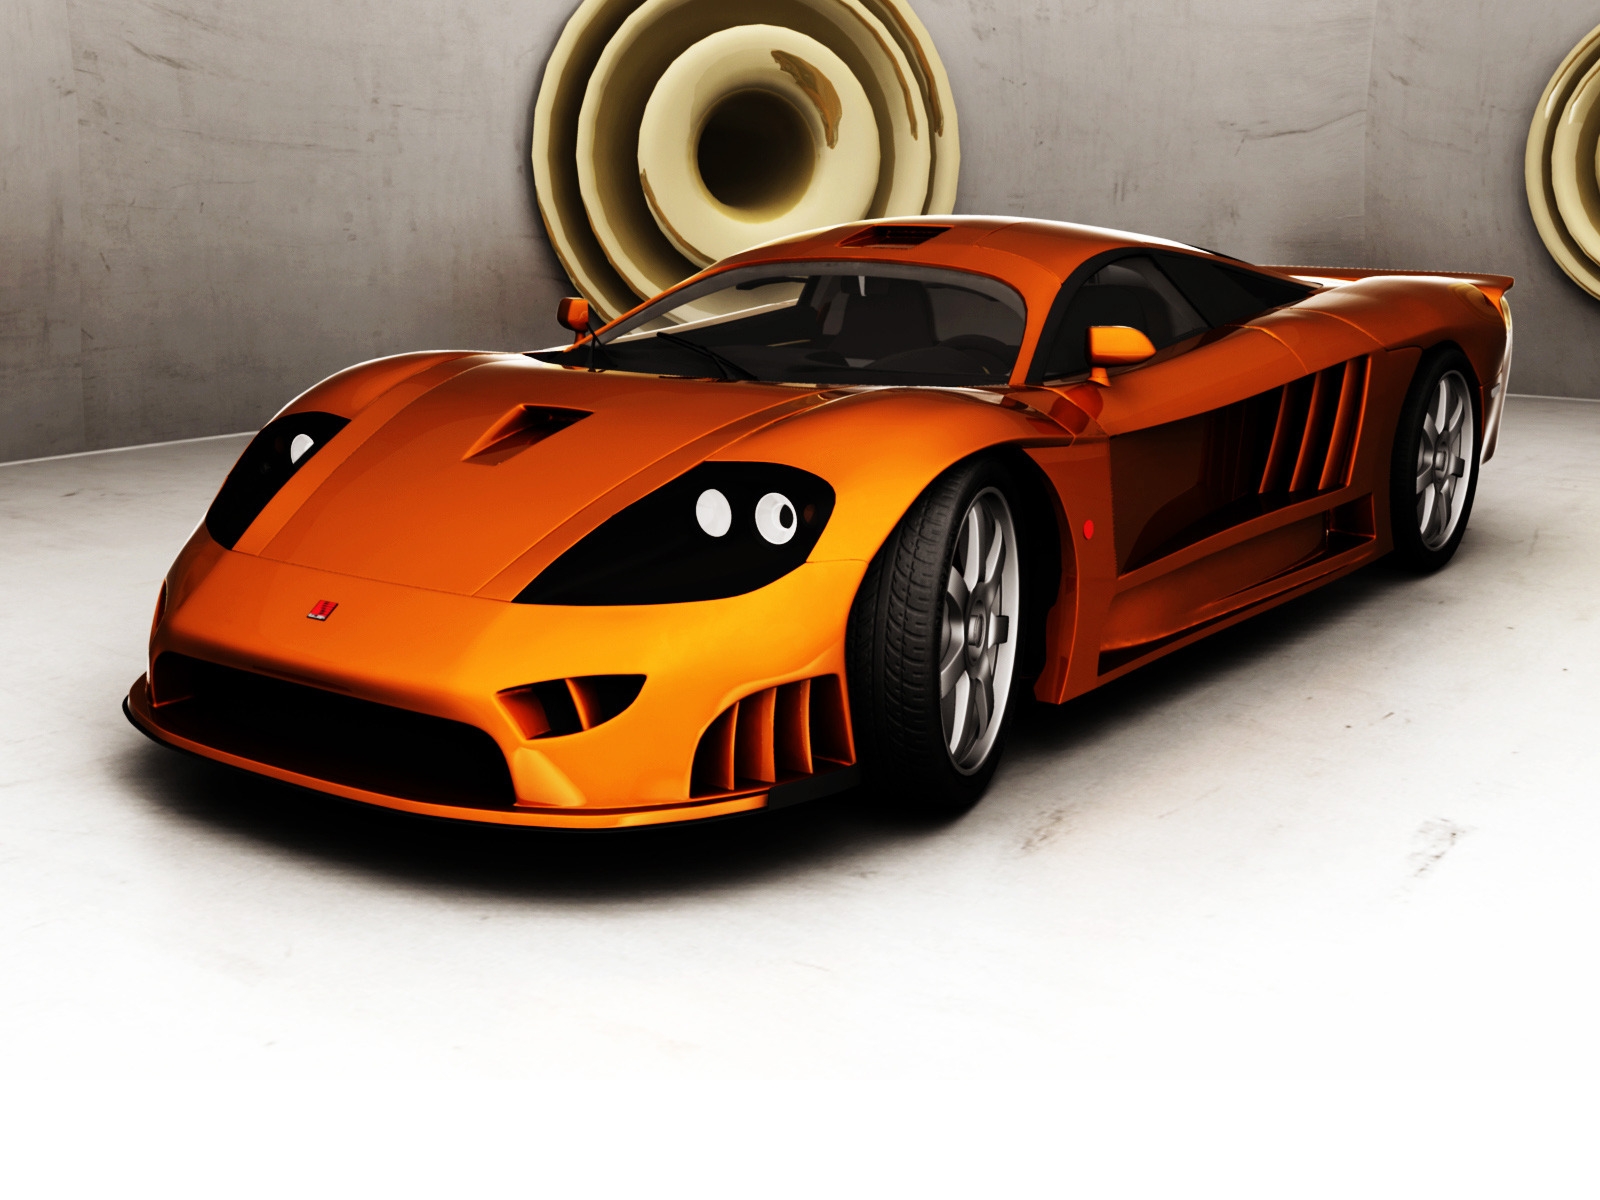 Saleen S7 Front for 1600 x 1200 resolution